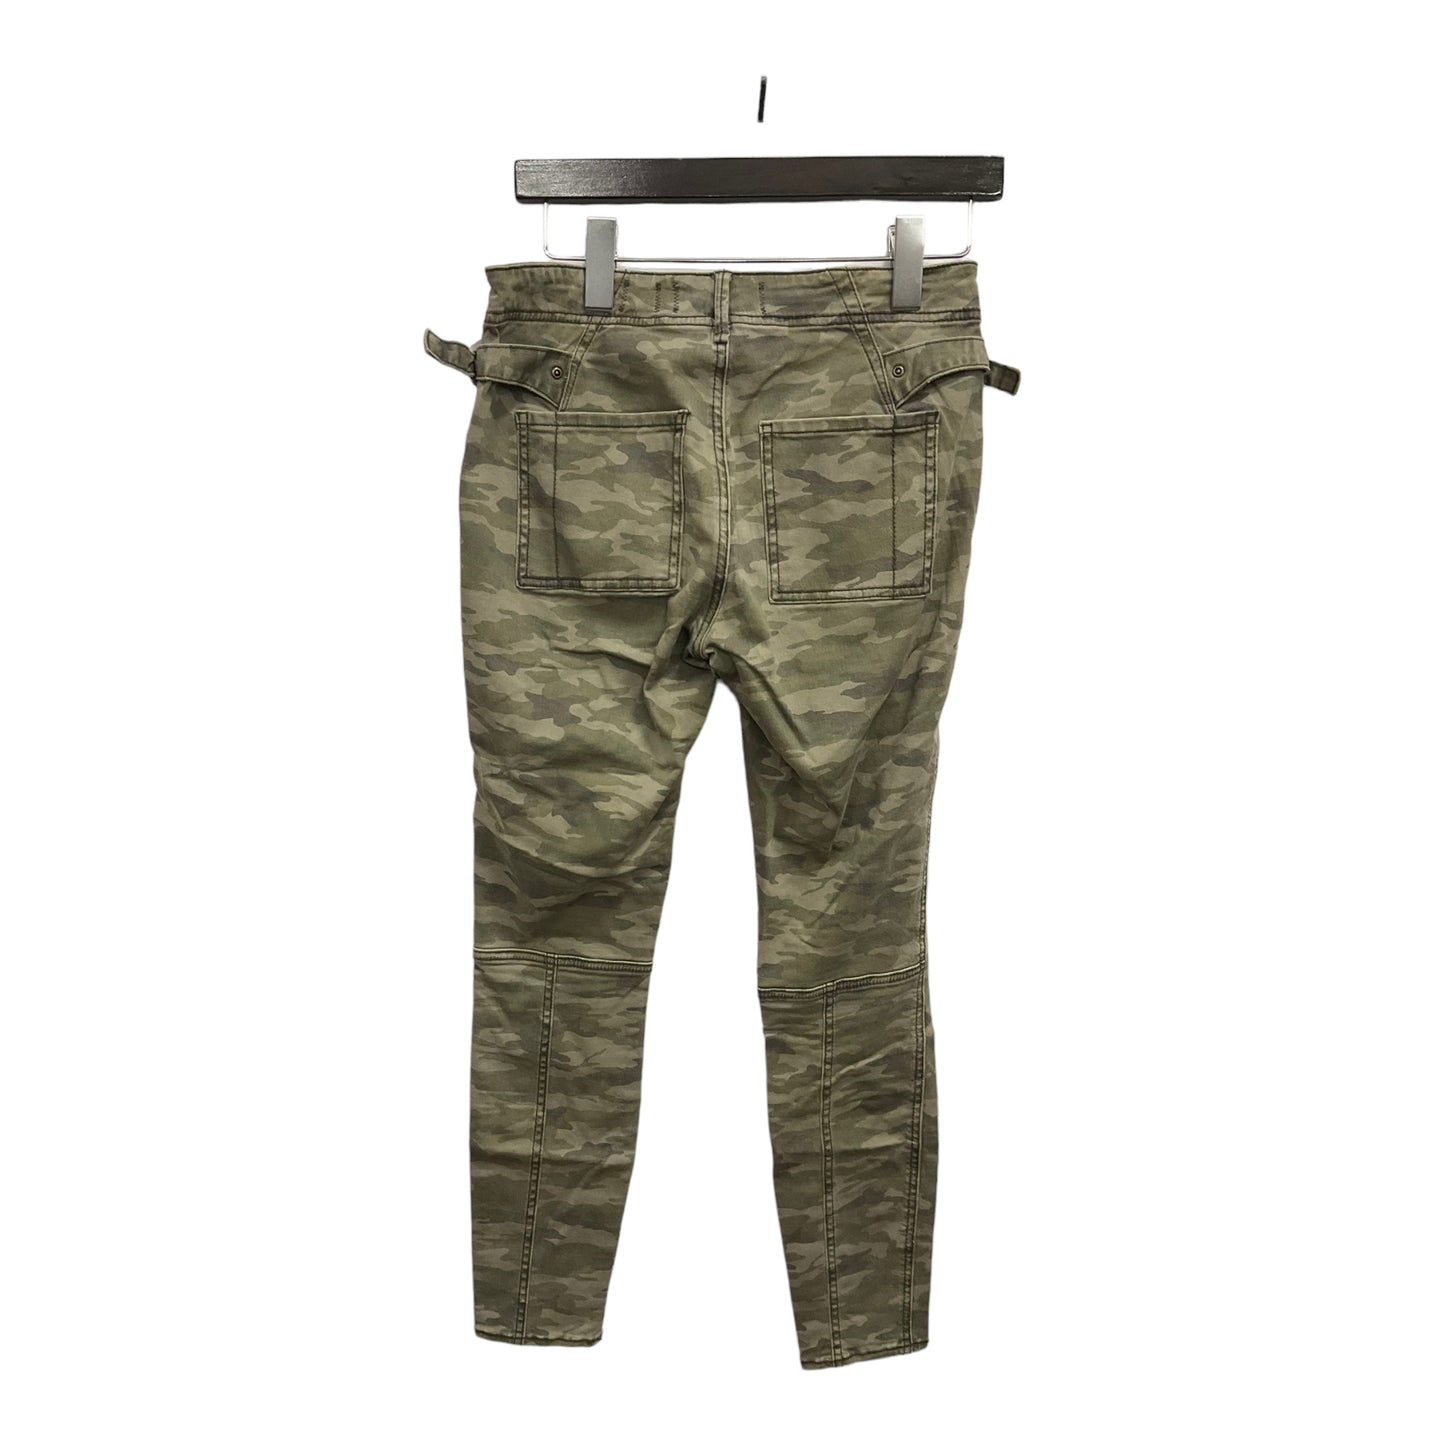 Pants Cargo & Utility By Anthropologie  Size: 2